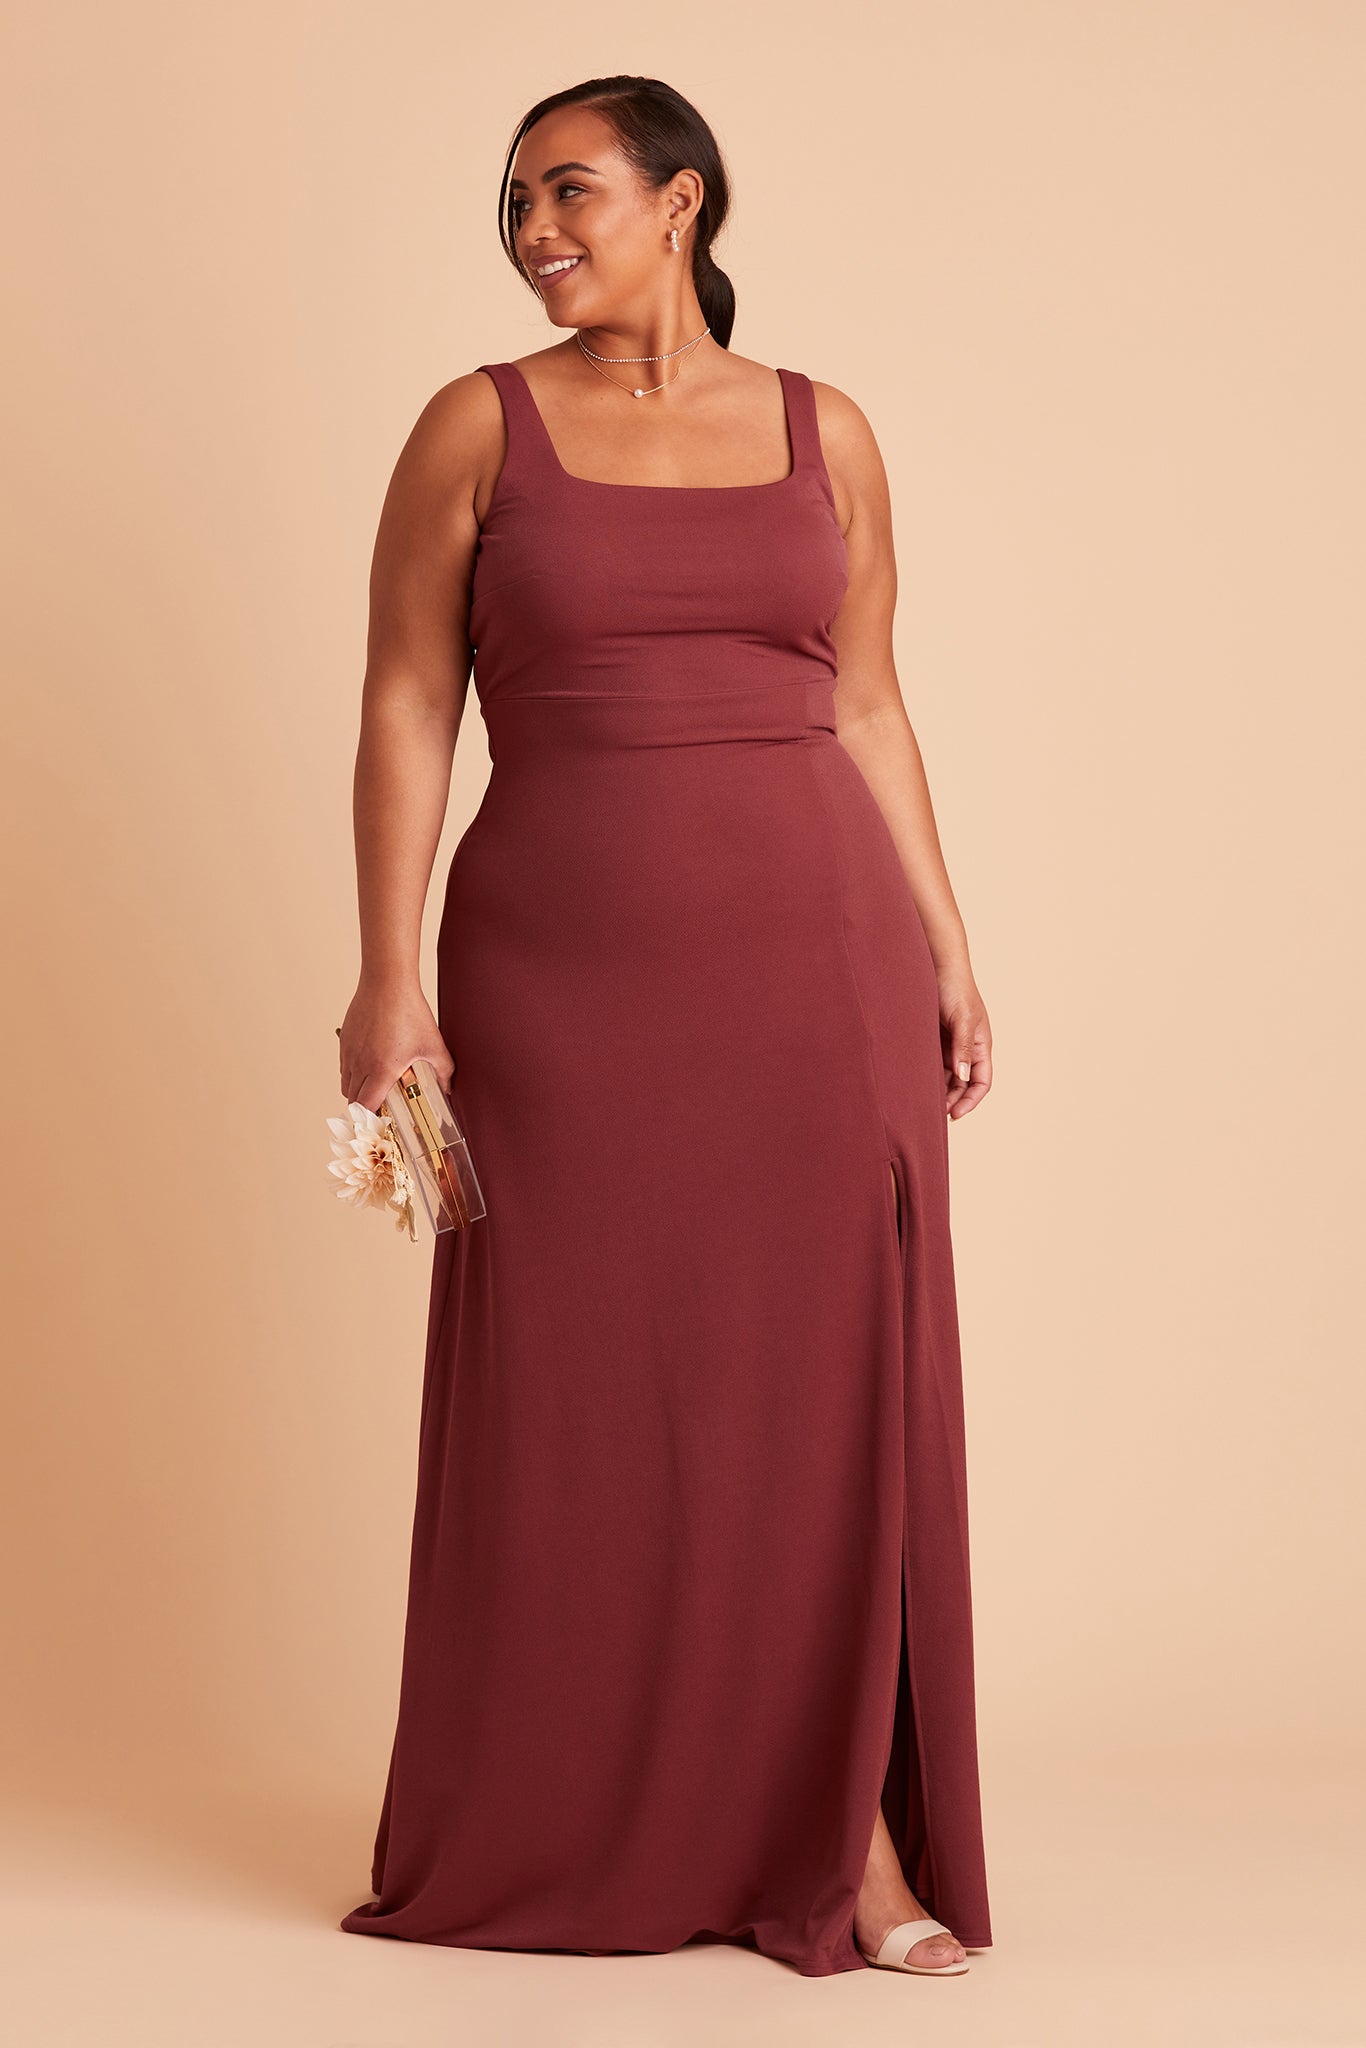 Alex convertible plus size bridesmaid dress with slit in rosewood crepe by Birdy Grey, front view